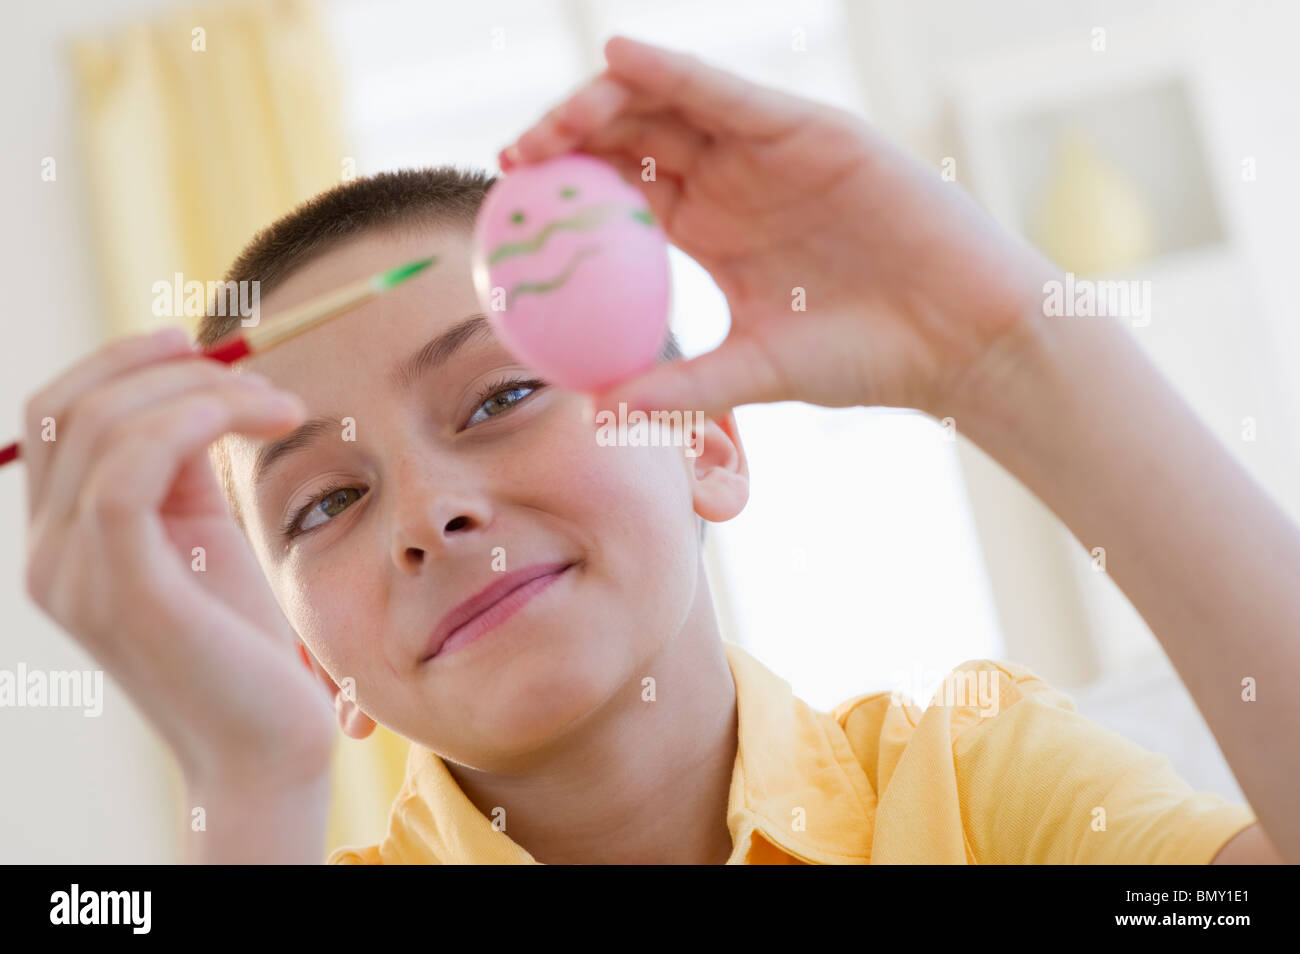 Young boy decorating an Easter egg Stock Photo